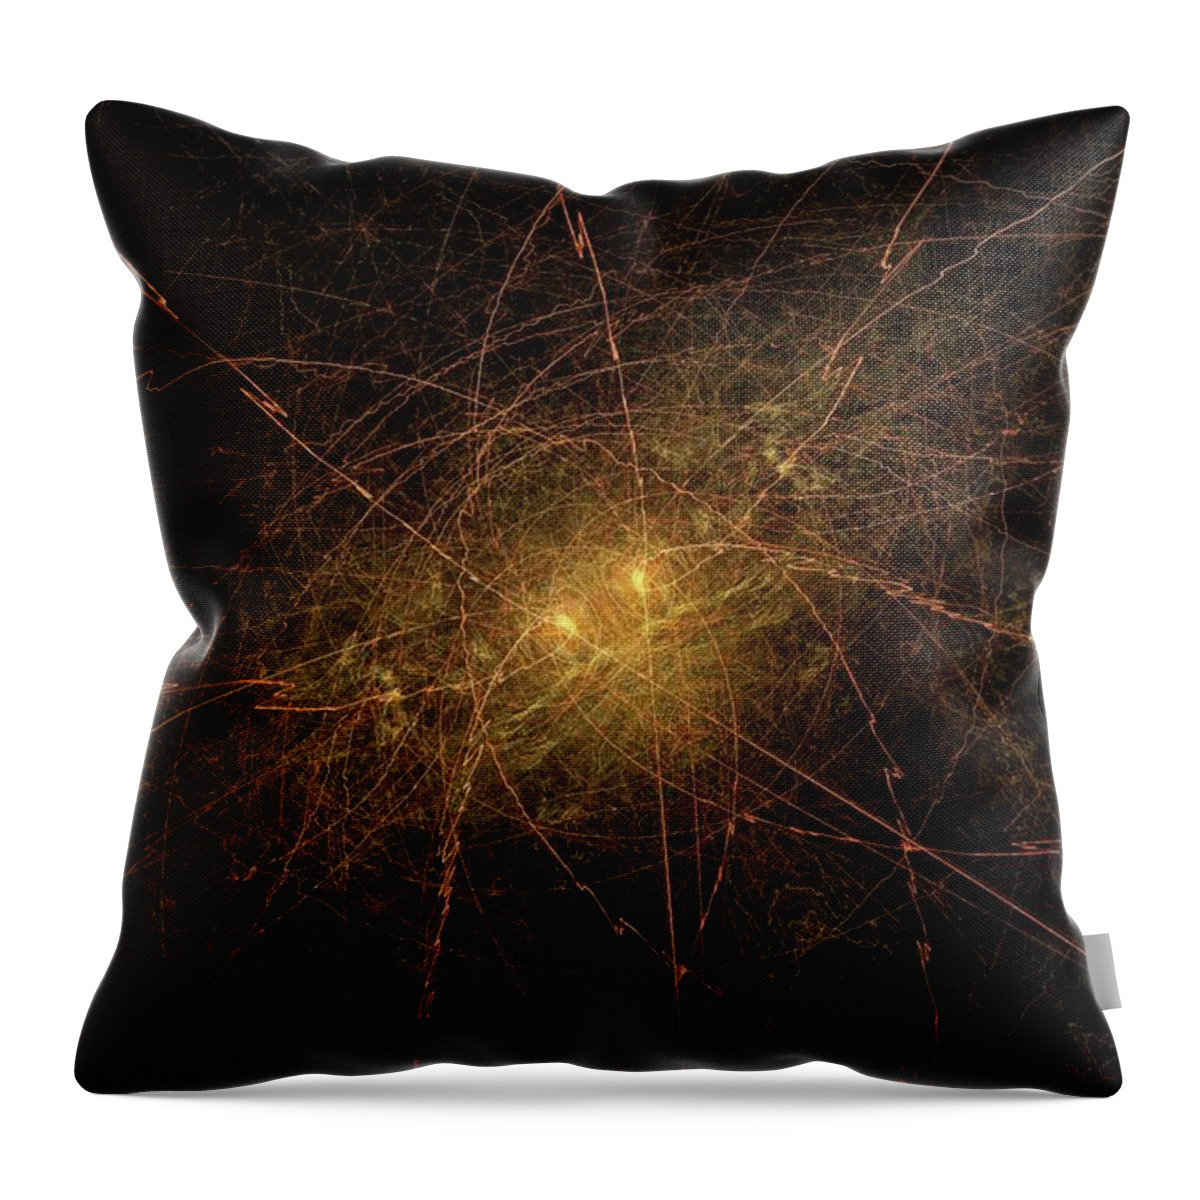 Home Throw Pillow featuring the digital art Neutral City by Jeff Iverson